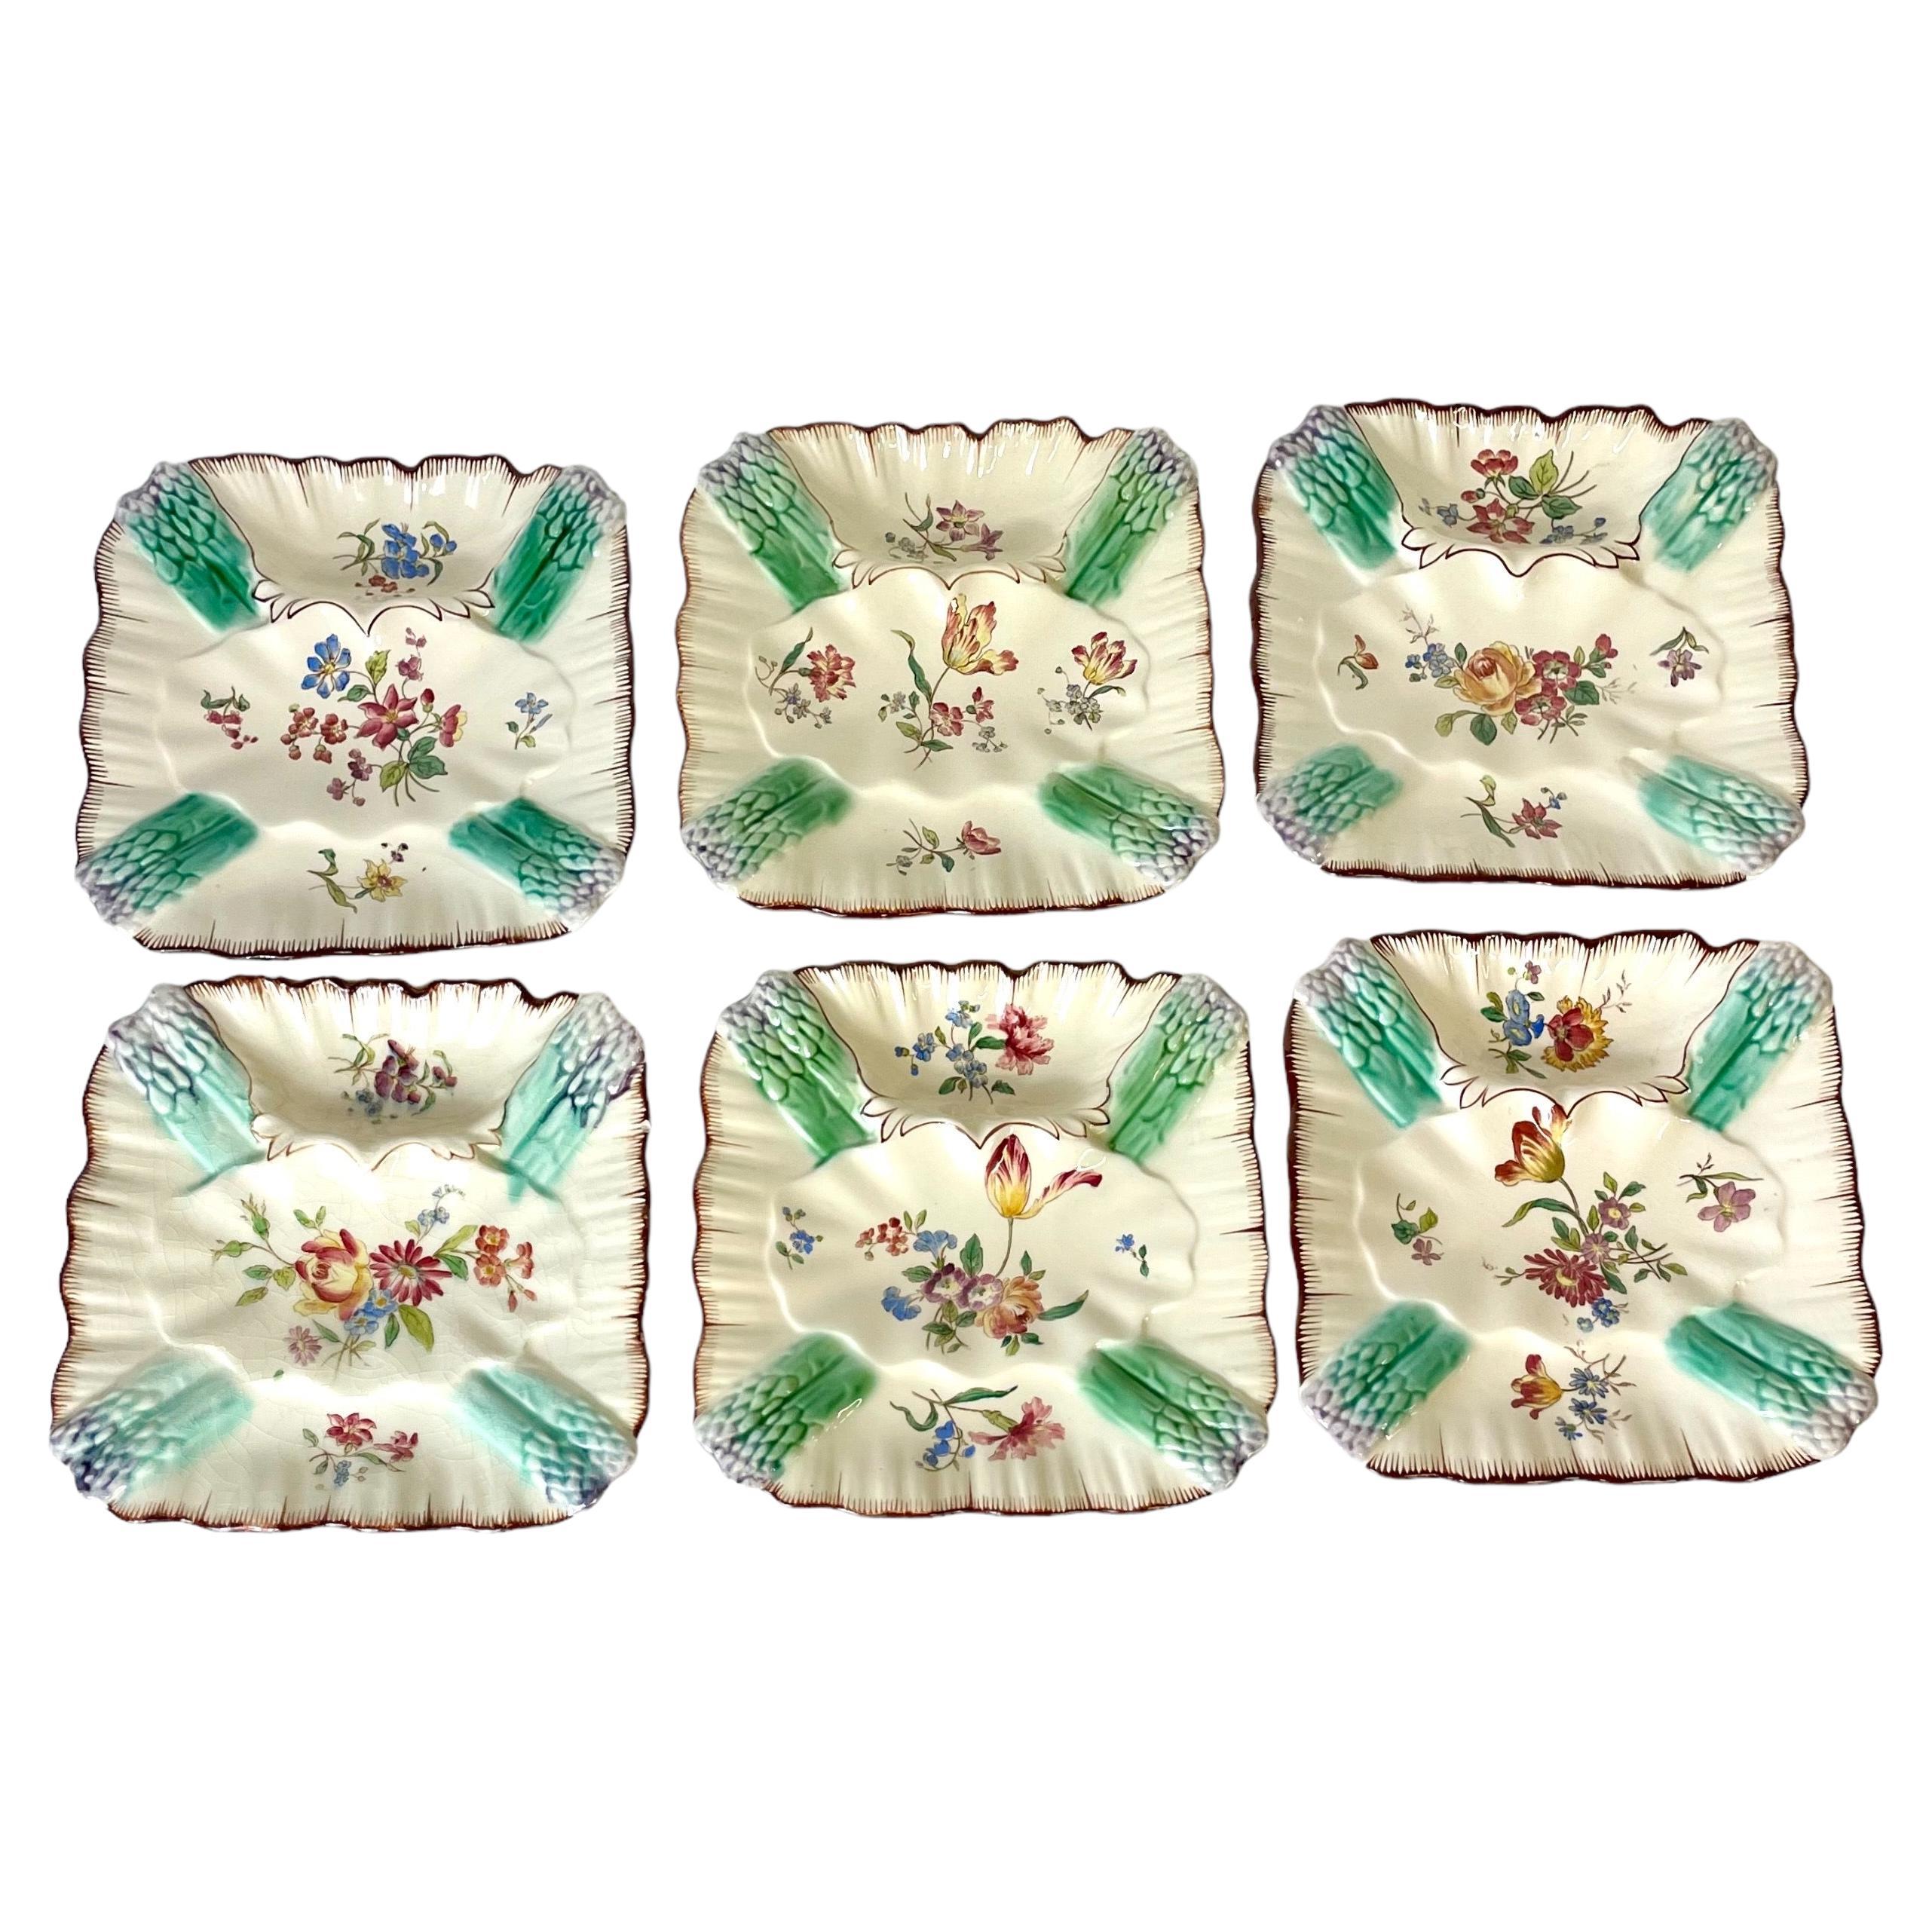 A charming set of six earthenware hand-painted square asparagus plates, with a pair of Majolica glazed asparagus tips at each of the four corners. In between, sprays of polychrome flowers adorn the centre, all set against a beautiful cream glazed